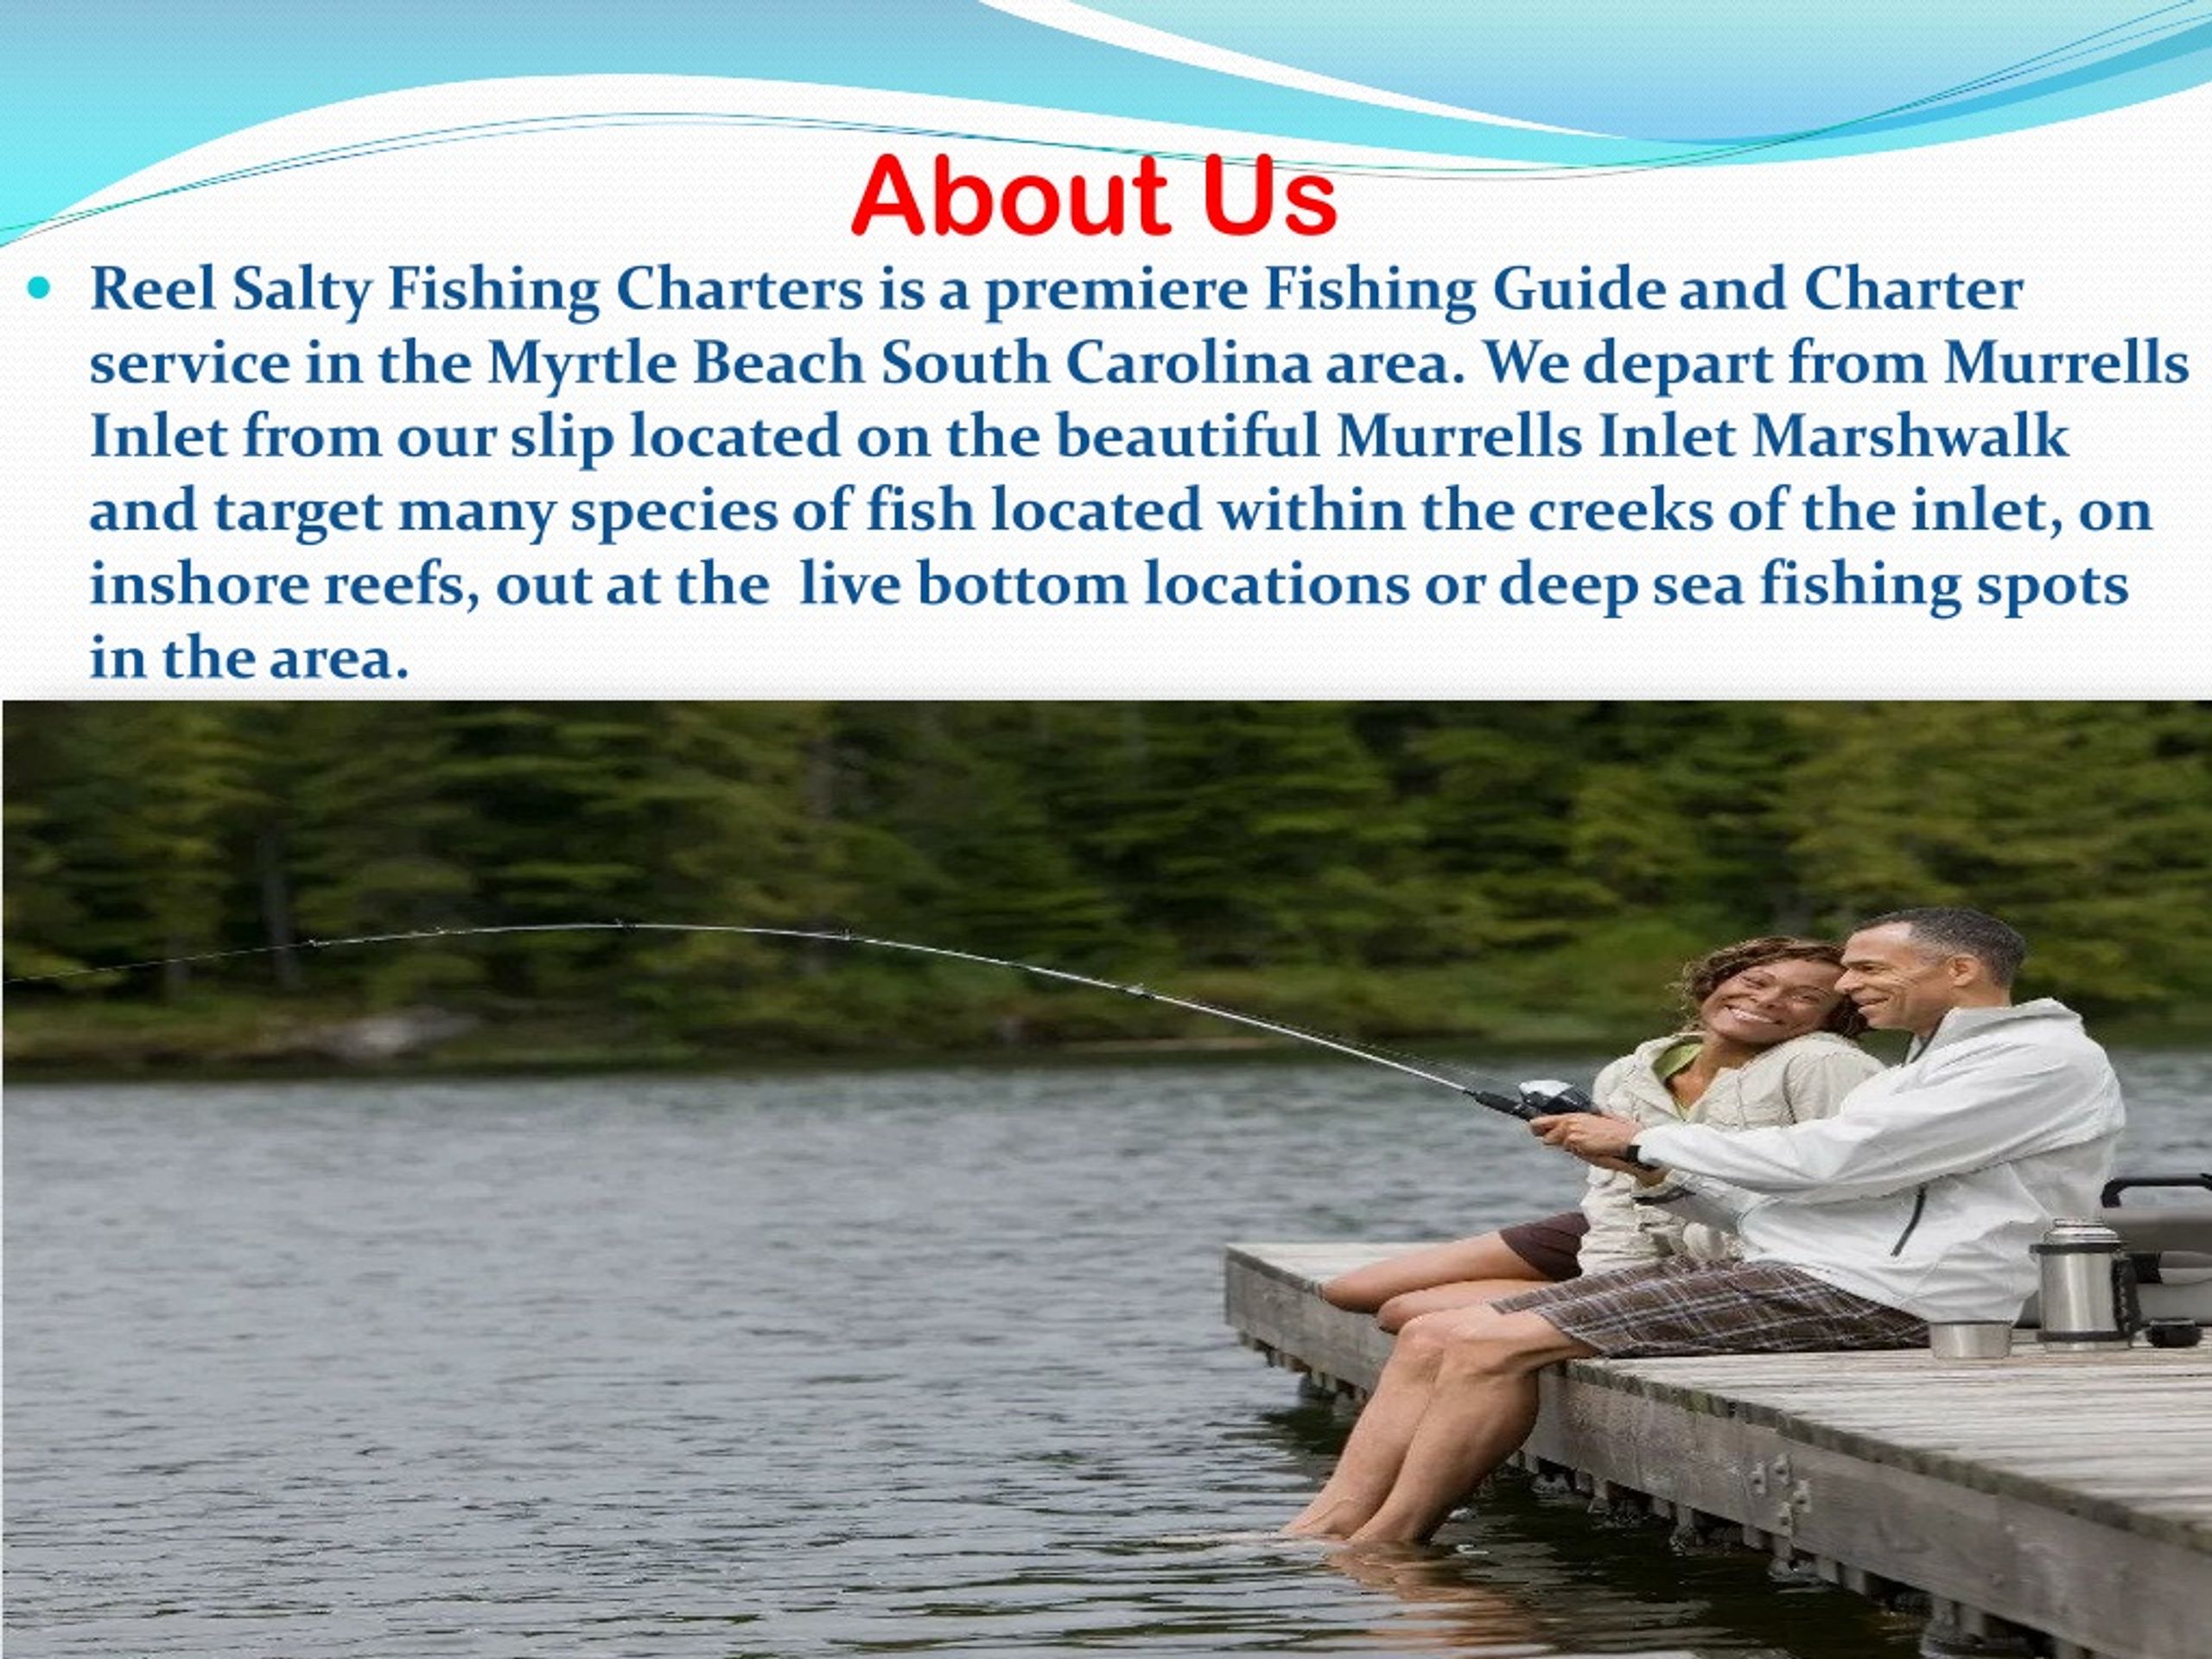 PPT - Reel Salty Fishing Charters PowerPoint Presentation, free